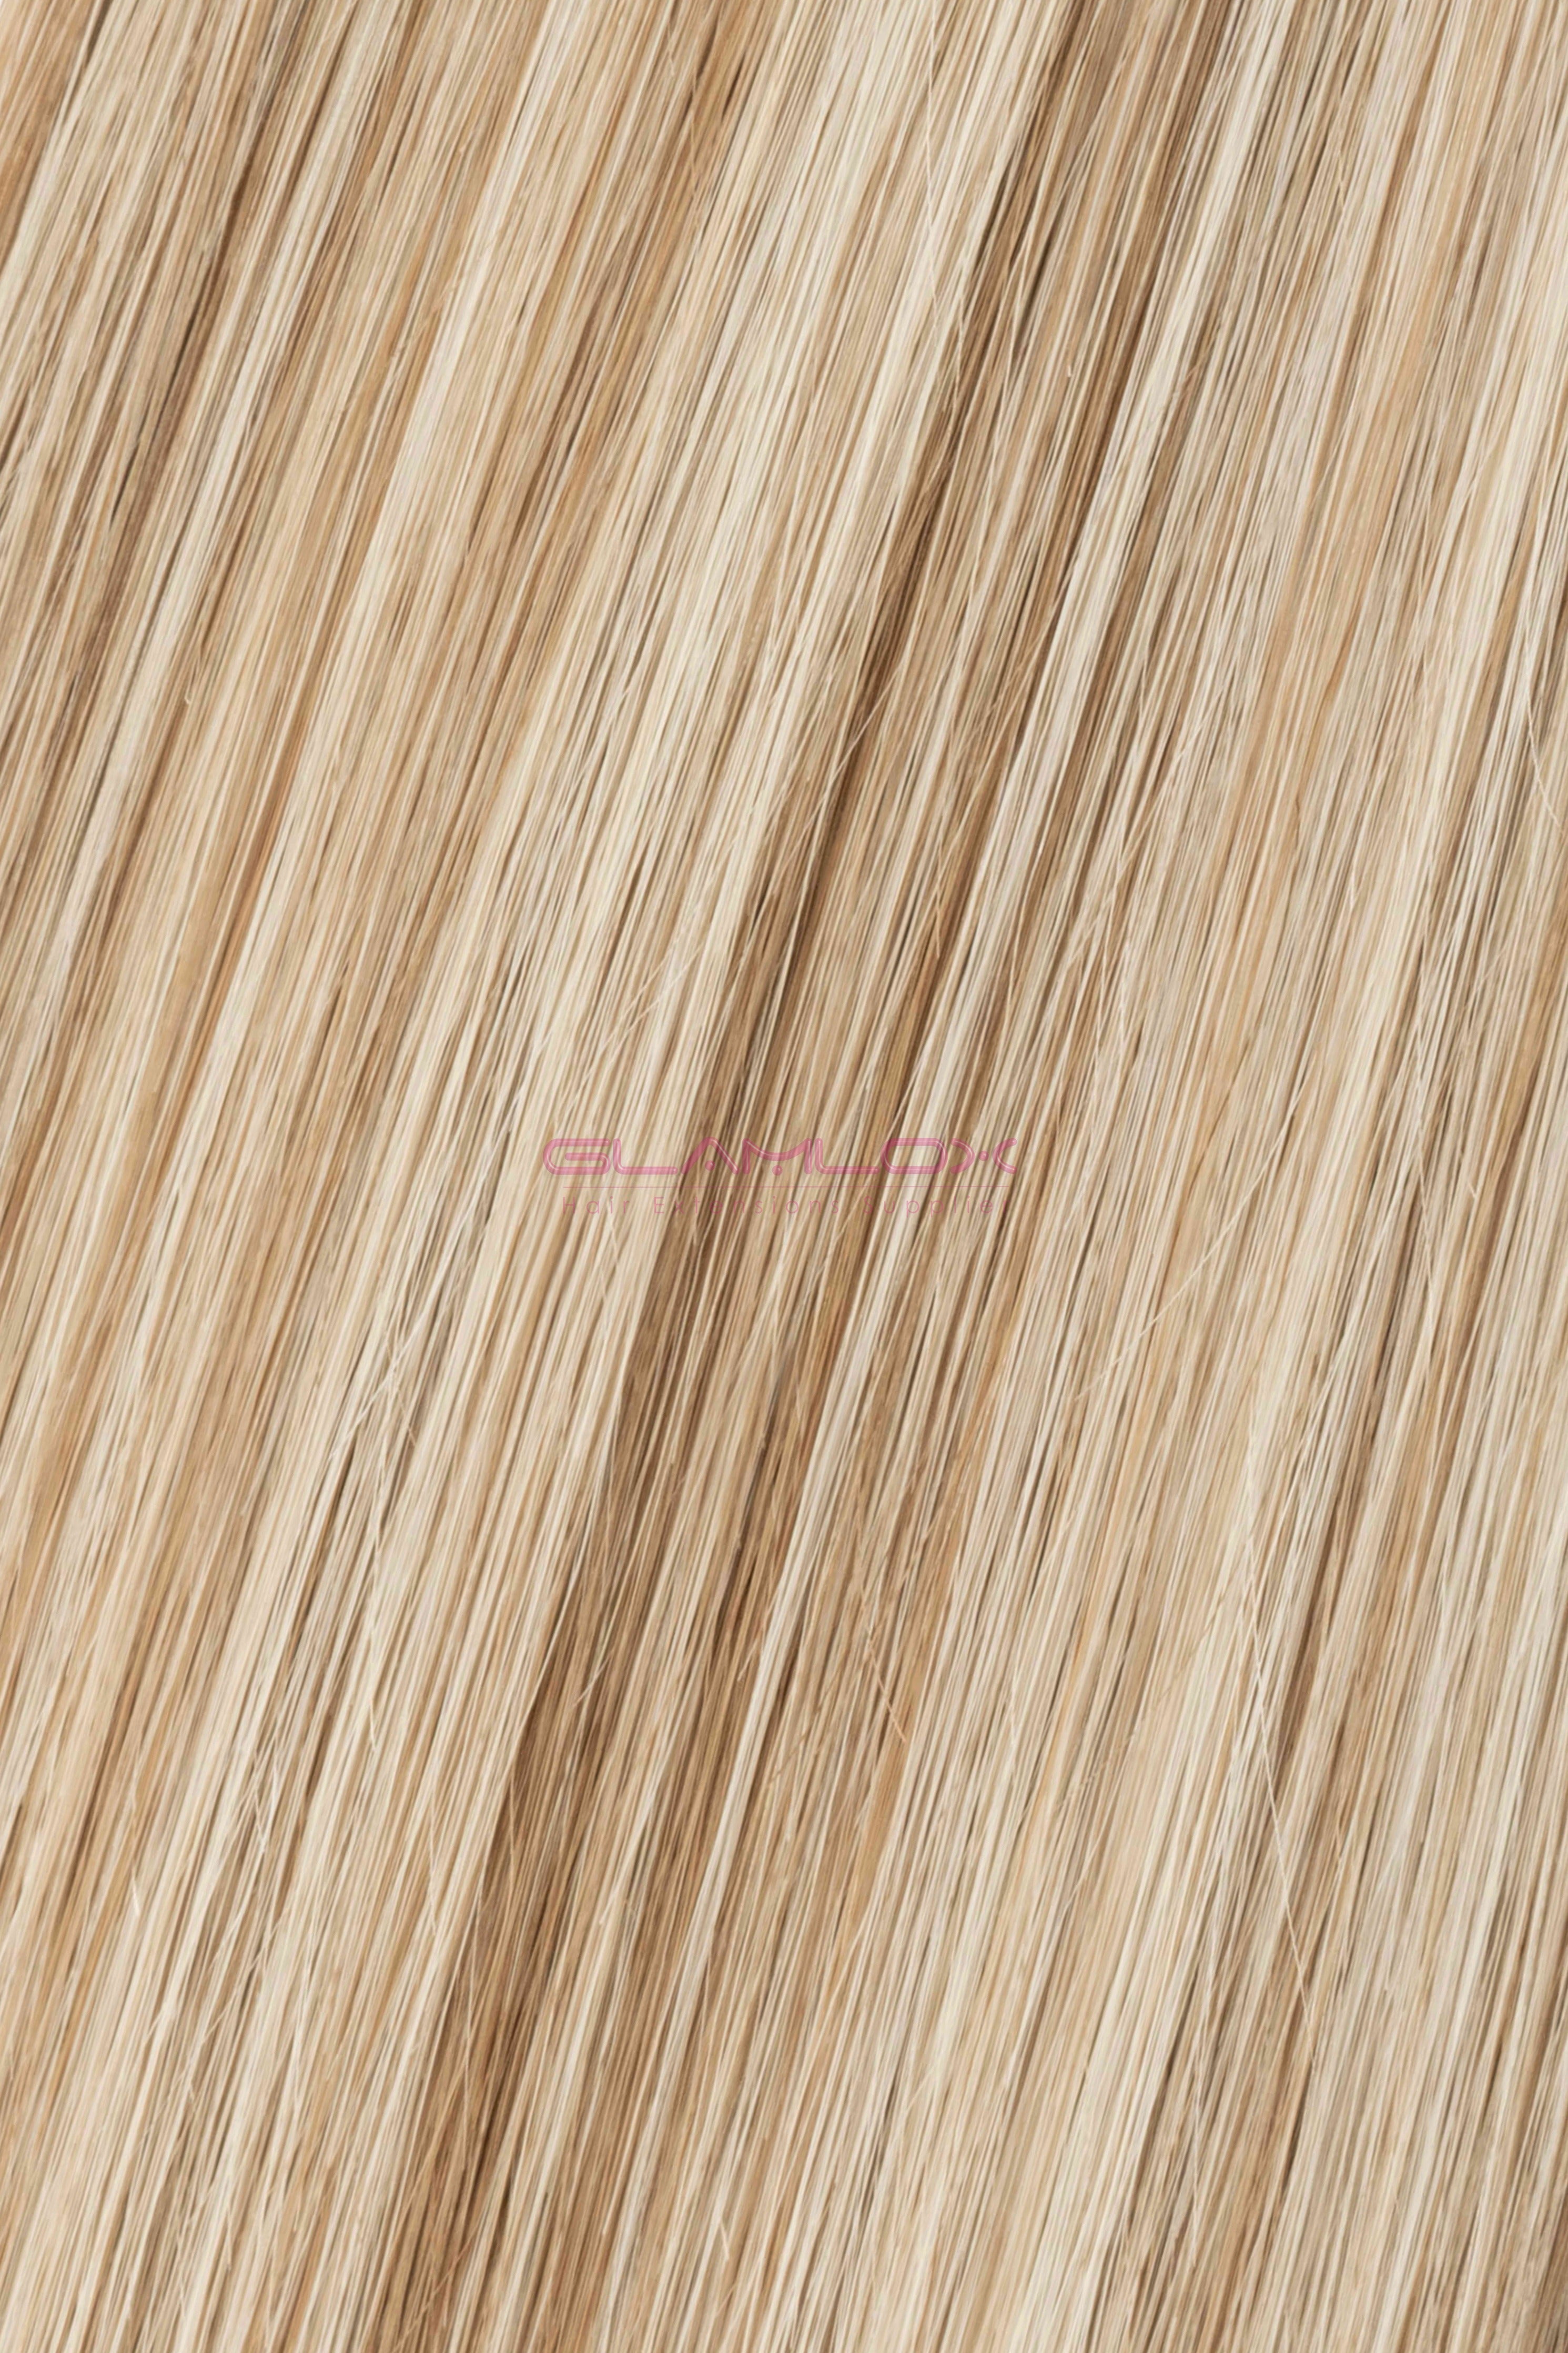 18" Pre-Bonded - Russian Mongolian Double Drawn Remy Human Hair  - 20 Strands